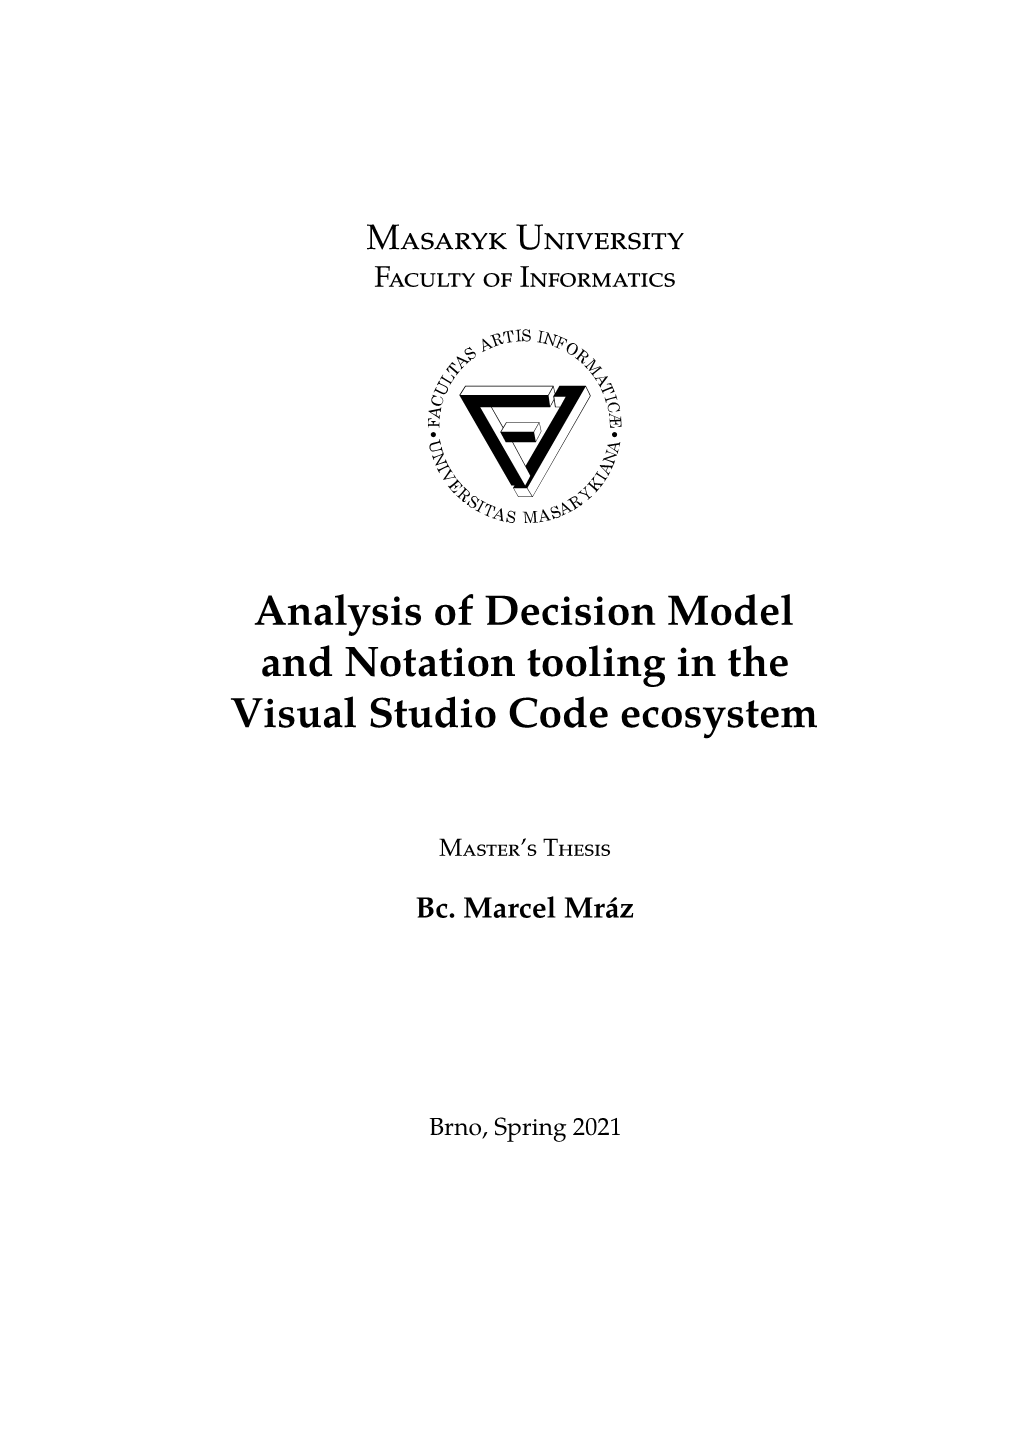 Analysis of Decision Model and Notation Tooling in the Visual Studio Code Ecosystem